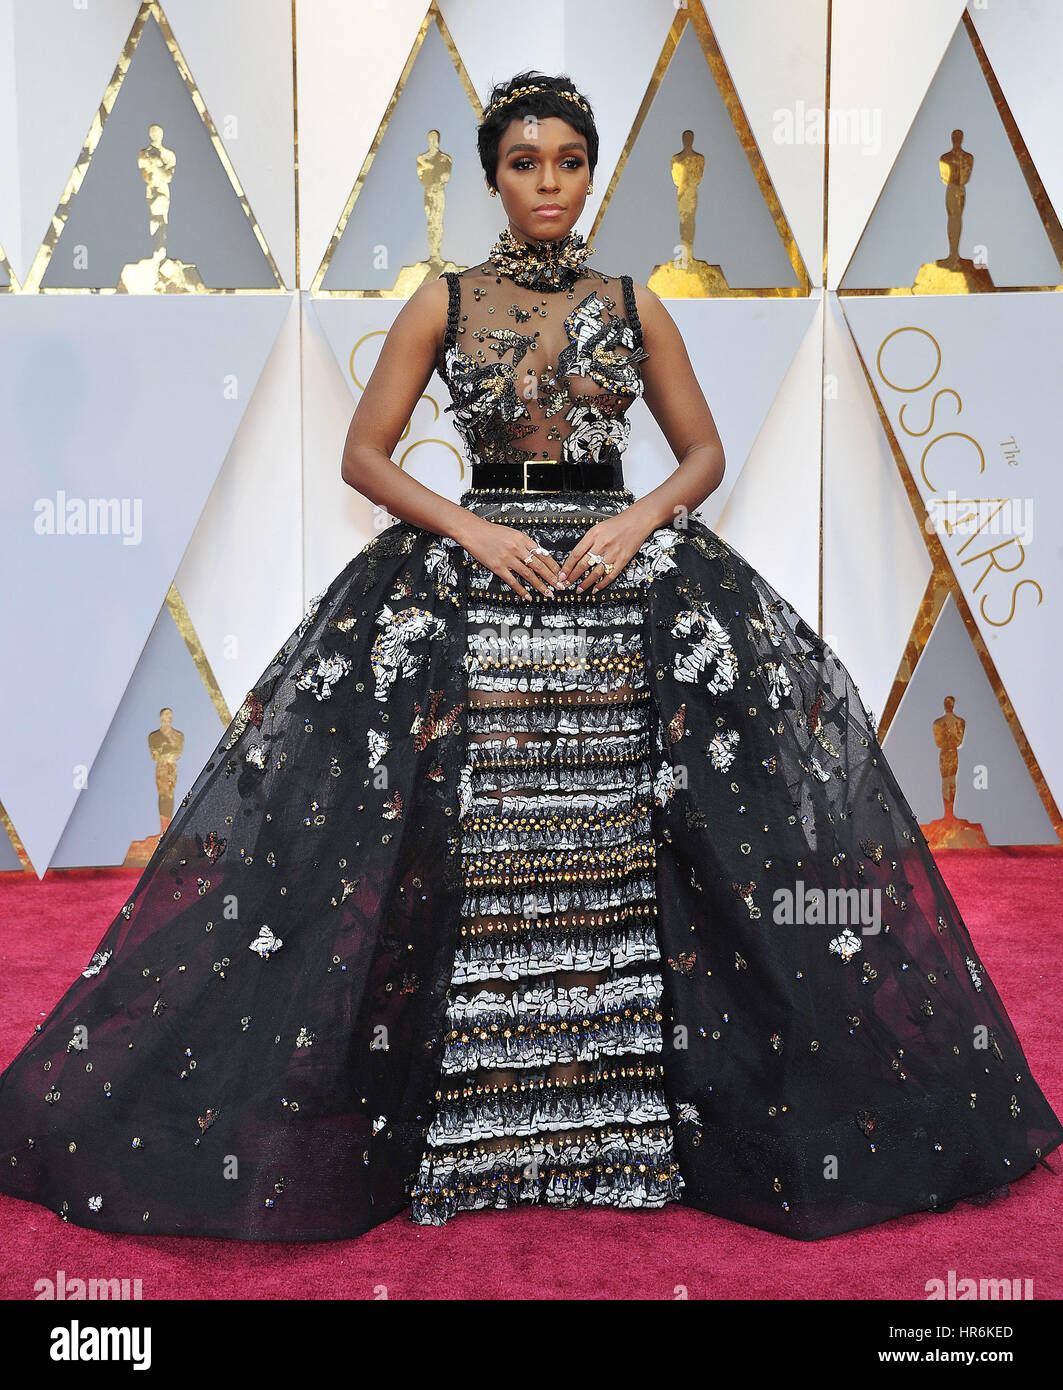 HOLLYWOOD - FEBRUARY 26: Janelle Monae attends the 89th Annual Academy Awards at the Dolby Theatre on February 26, 2017 in Hollywood, California. Credit: mpi99/MediaPunch Stock Photo